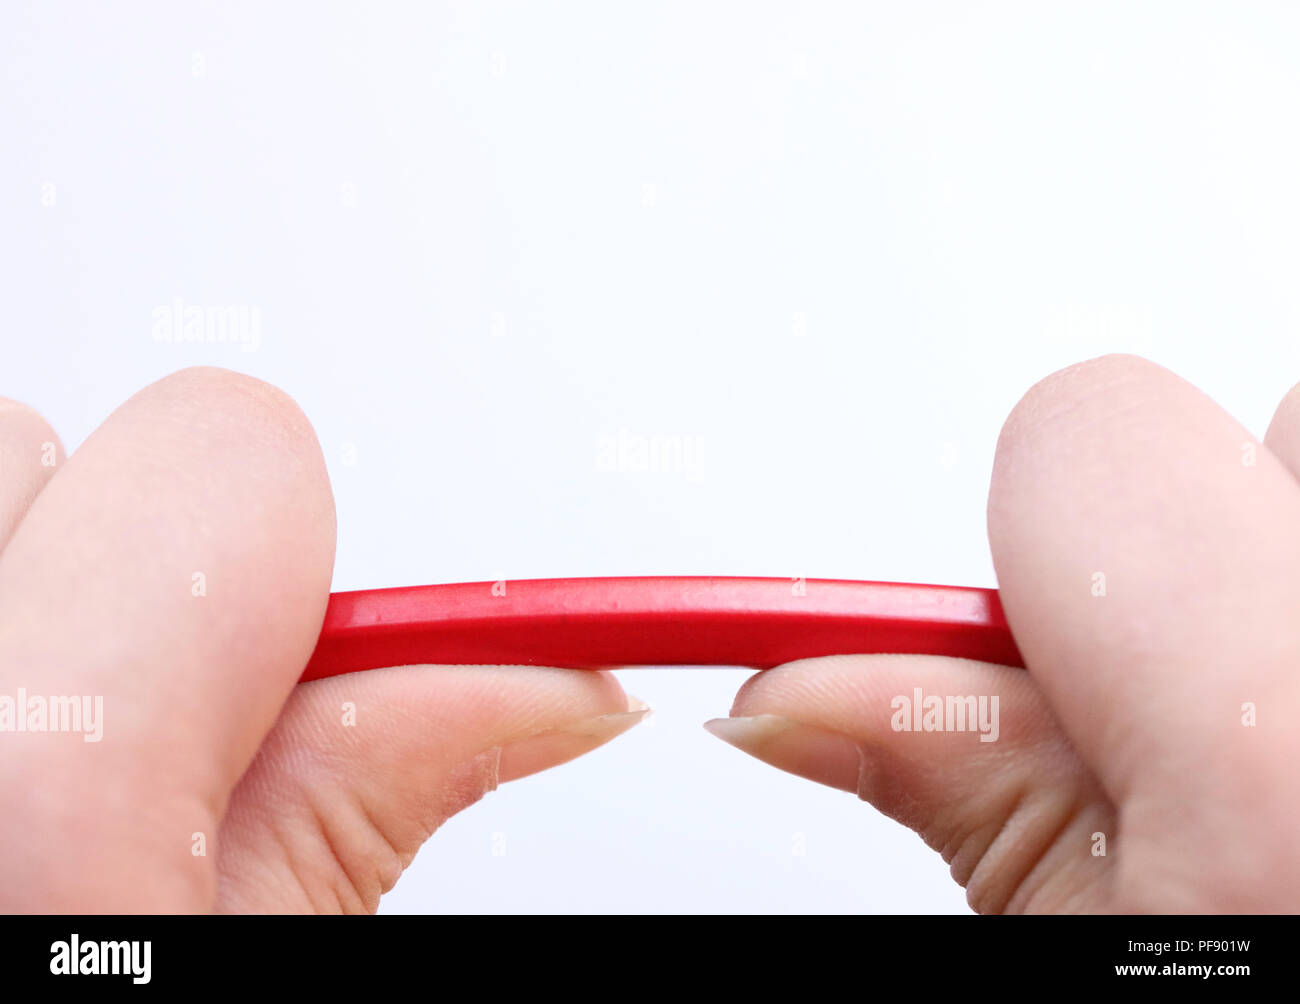 two hands holding a red pencil about to snap under the pressure. Concept of stress, anger management, pressure in the work place, parenting and breakd Stock Photo